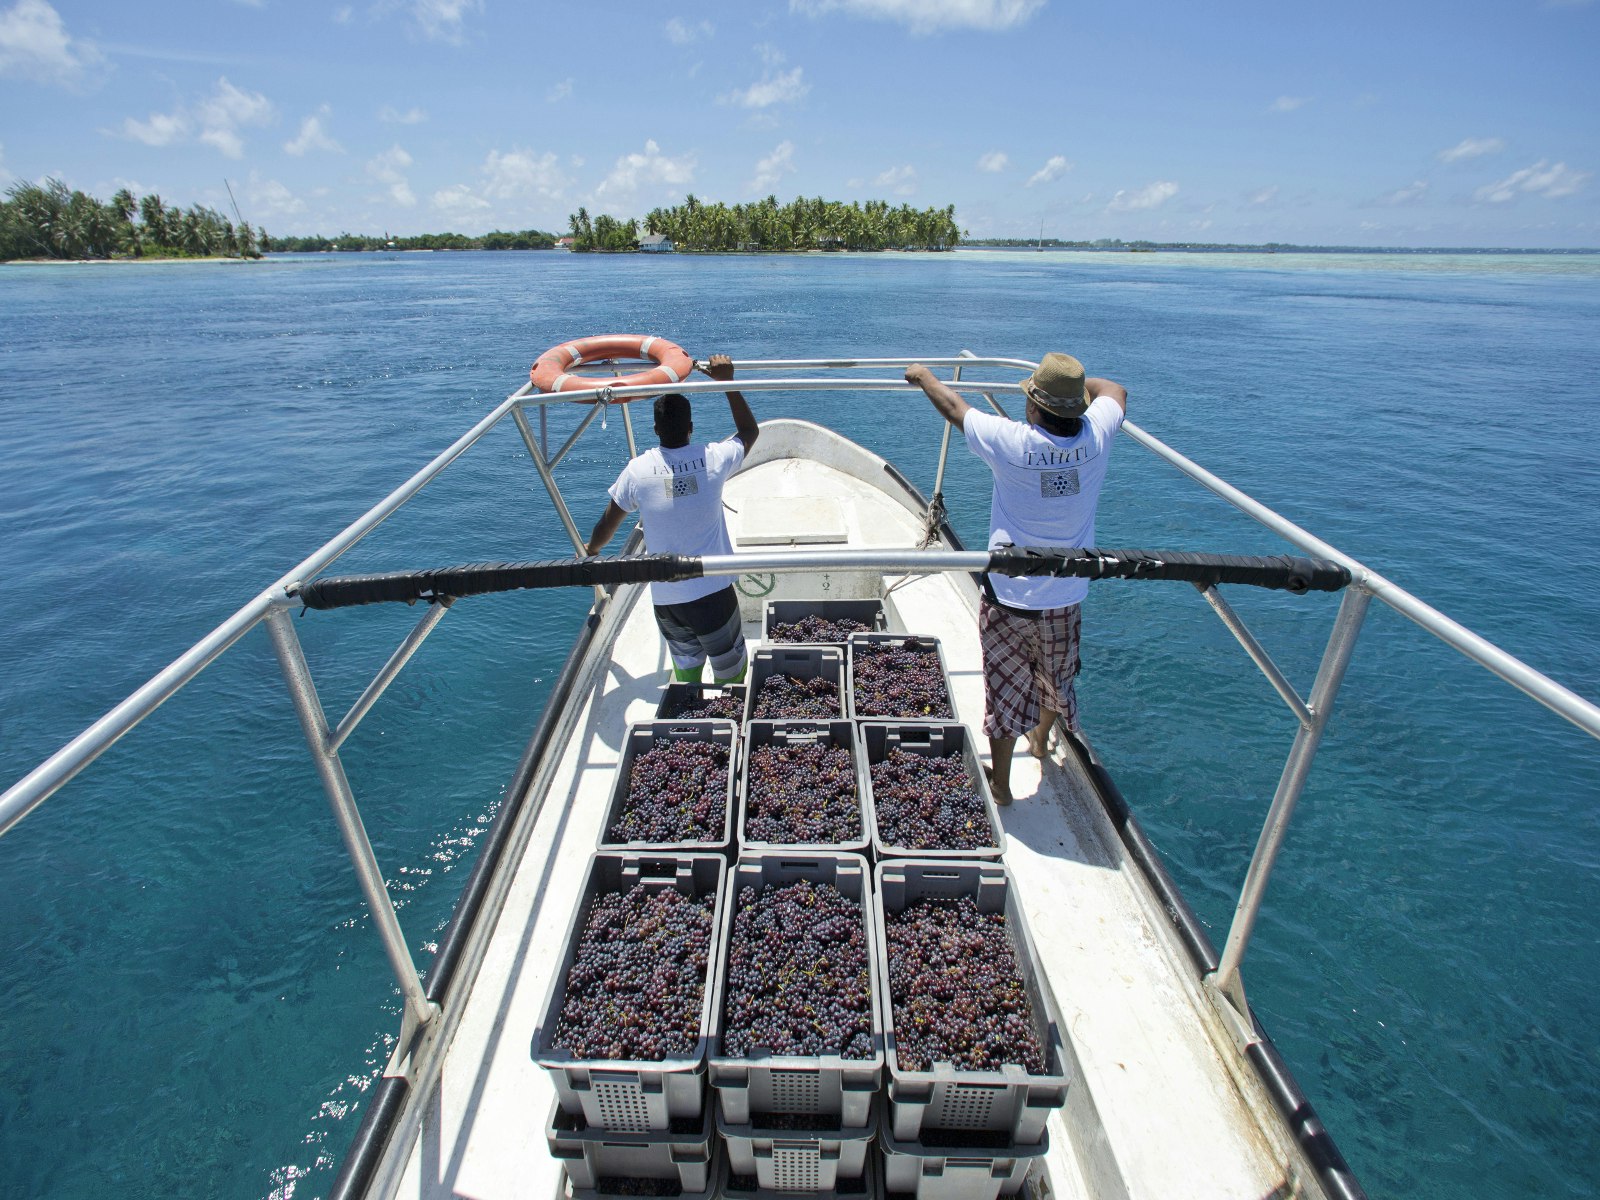 Two men on a boat carrying containers of red grapes to Vin de Tahiti winery